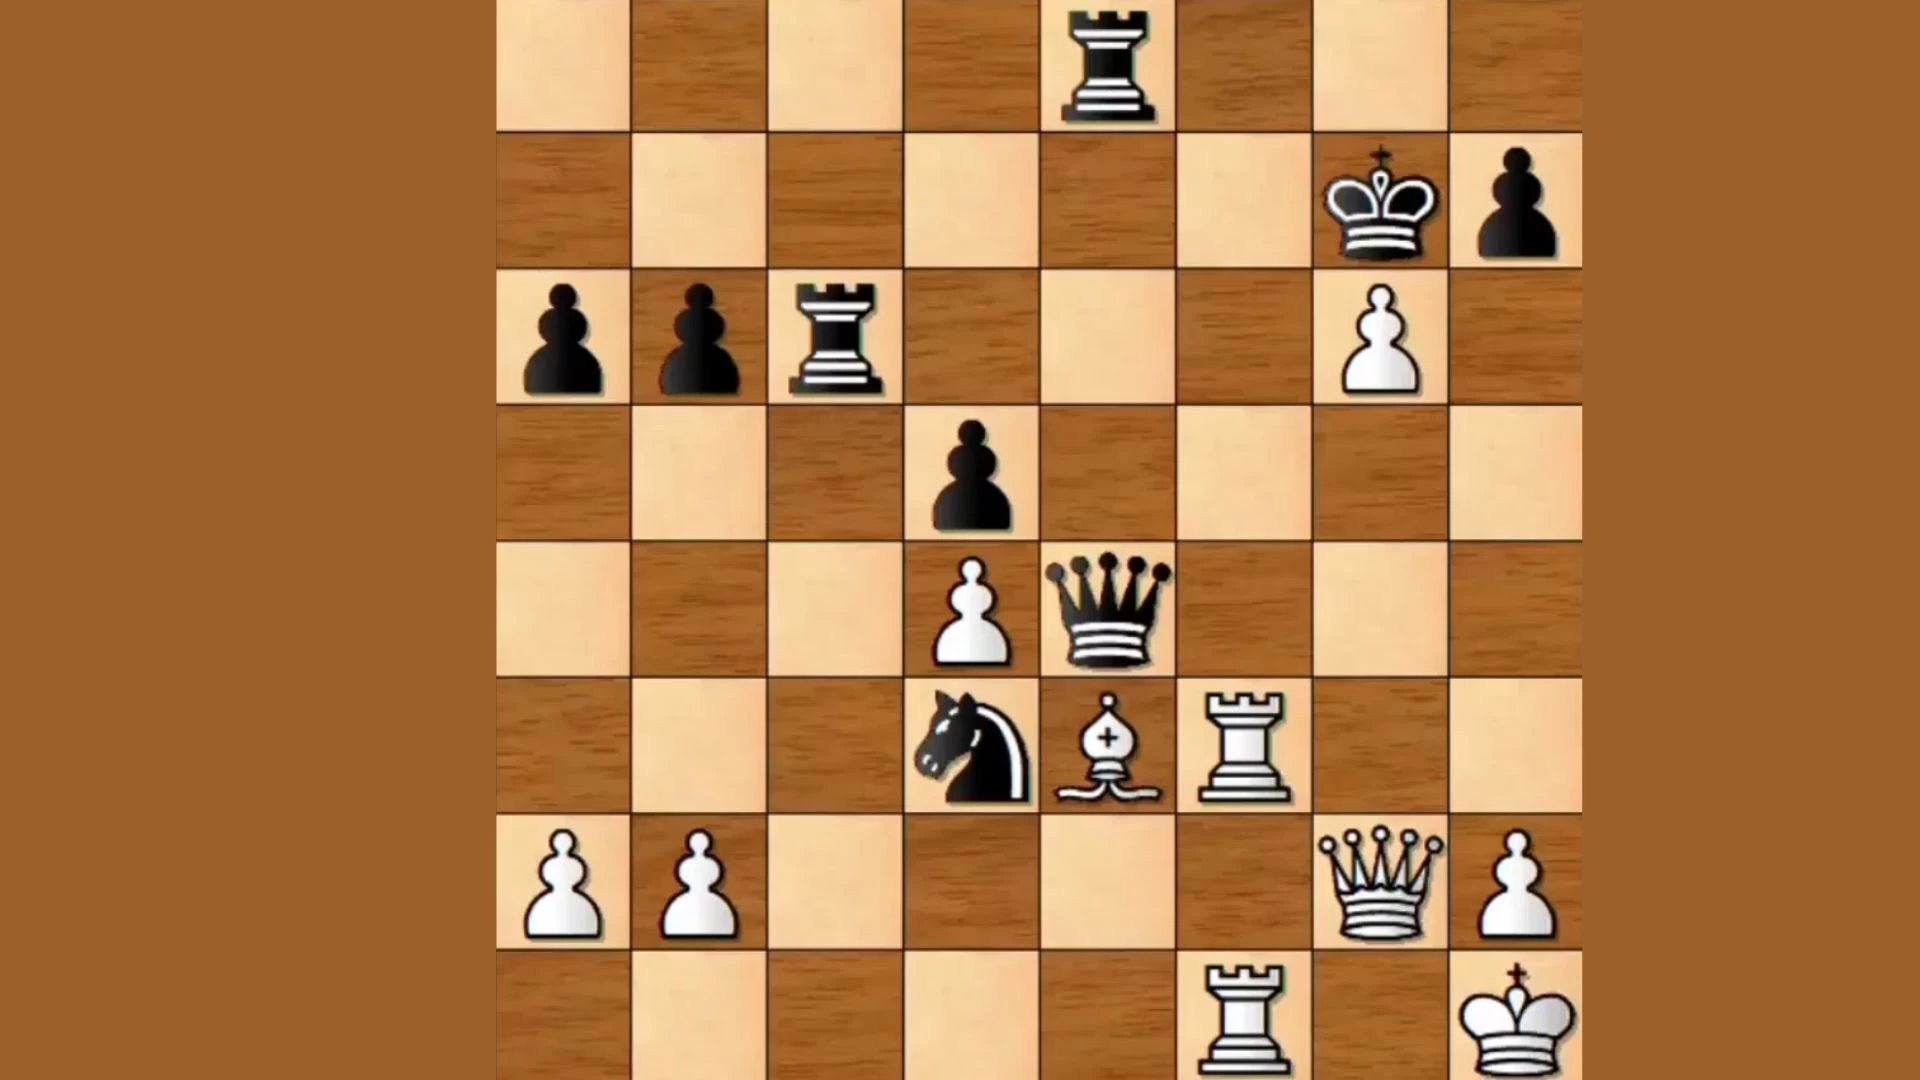 How Can You Solve This Chess Puzzle with Four White Moves?